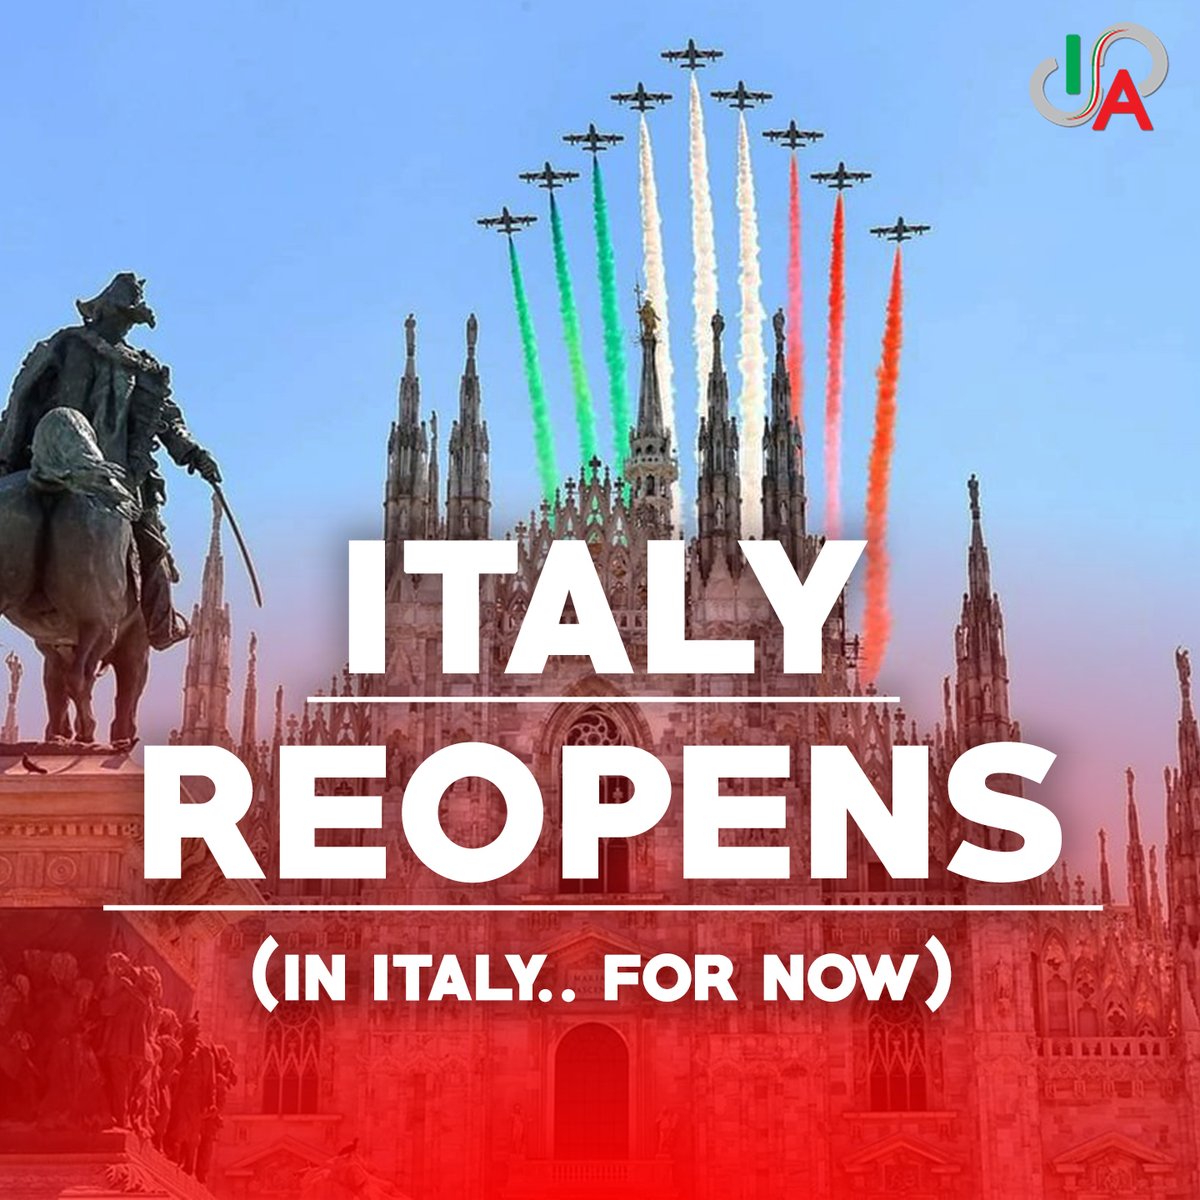 'Those who love Italy must be allowed to return to enjoy it, in compliance with governmental and regional guidelines.' continue here: bit.ly/3c611zB #Summer2020 #Italy #Tourism #Italia #USA #Chicago